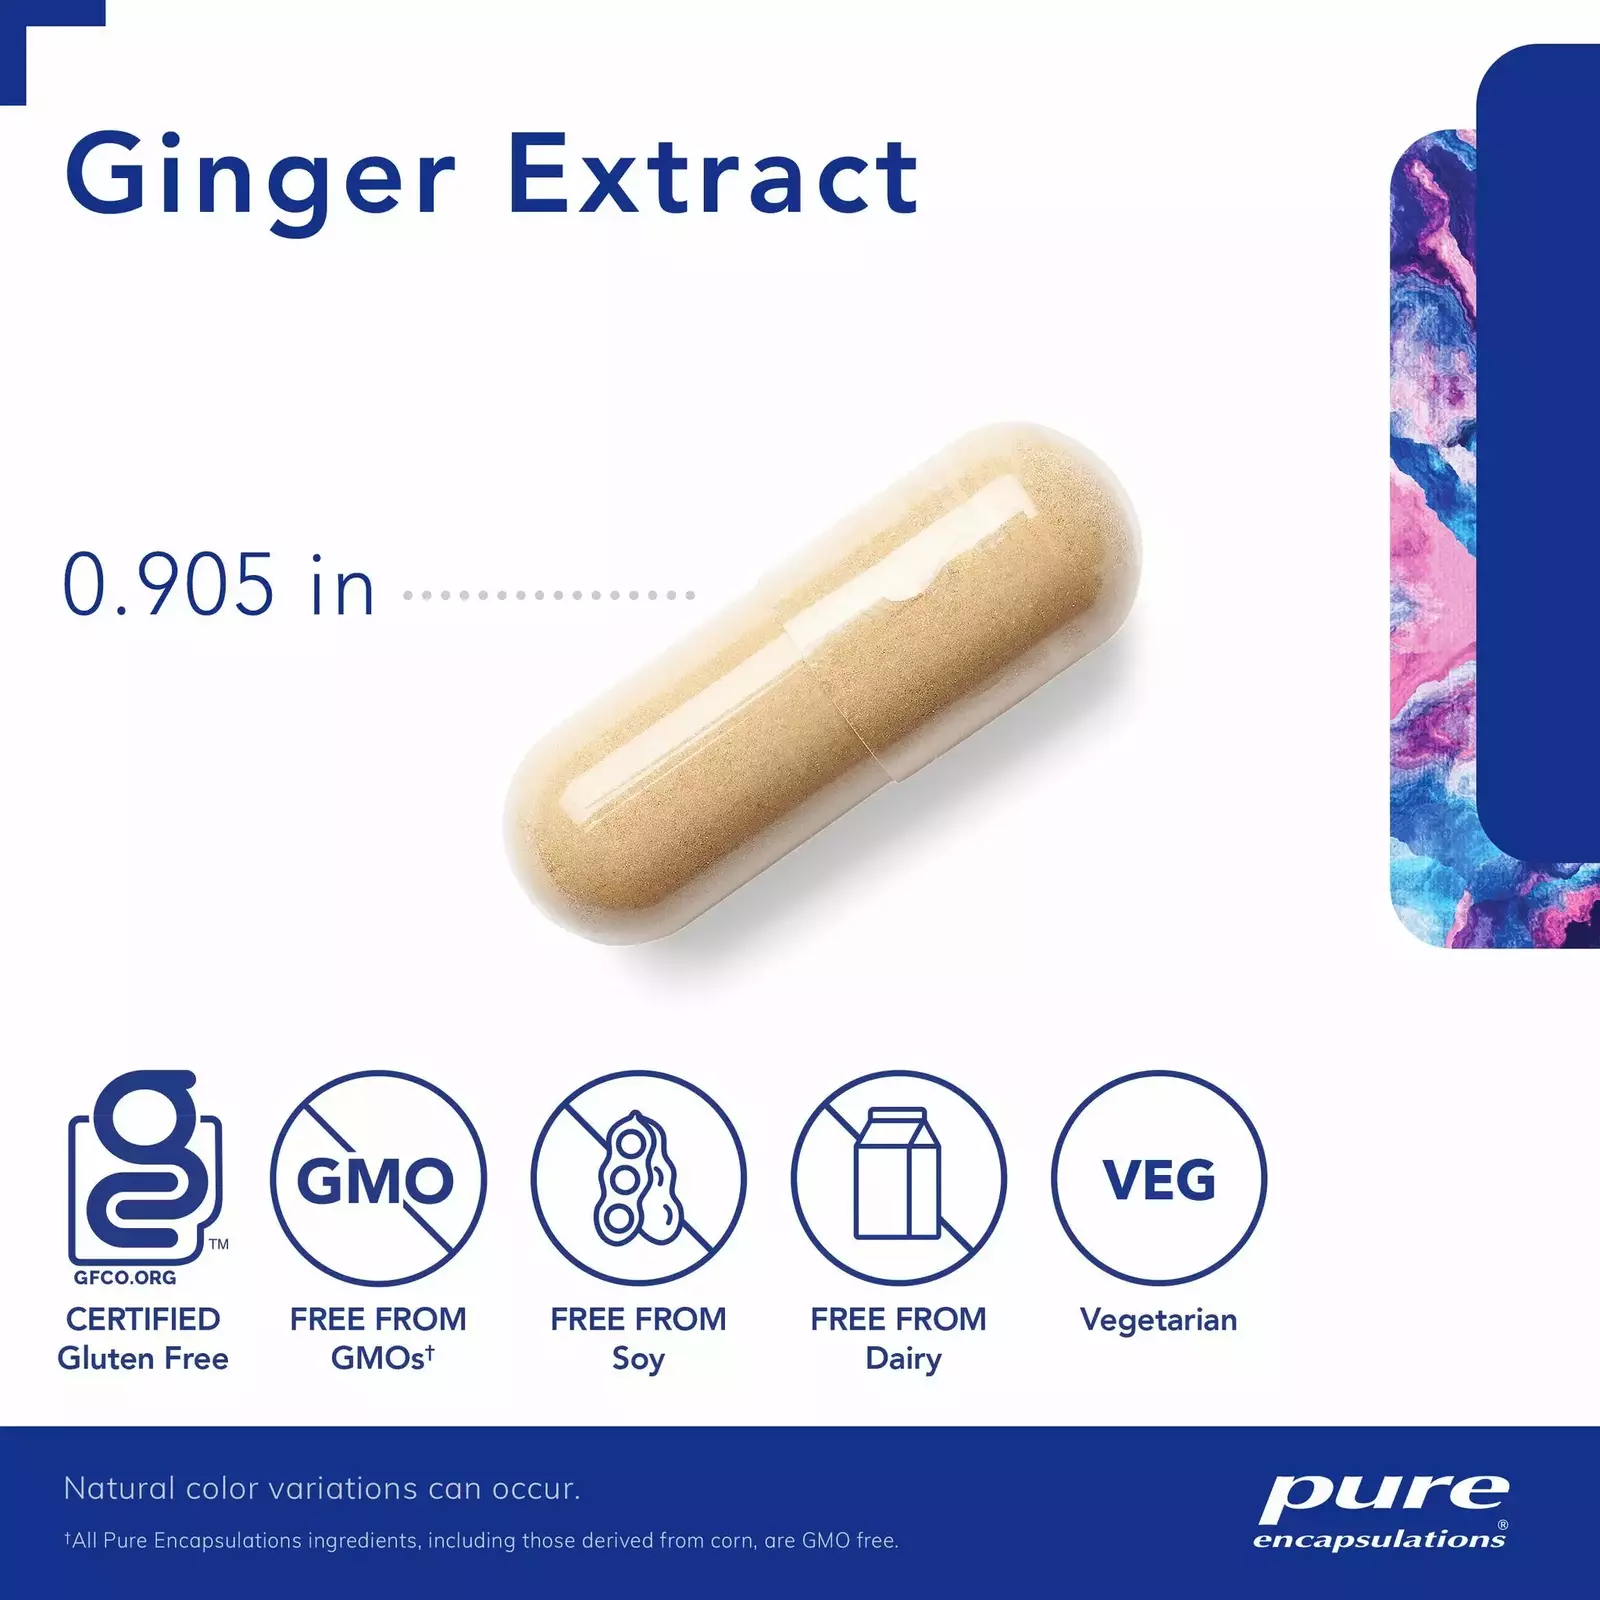 Ginger Extract #120